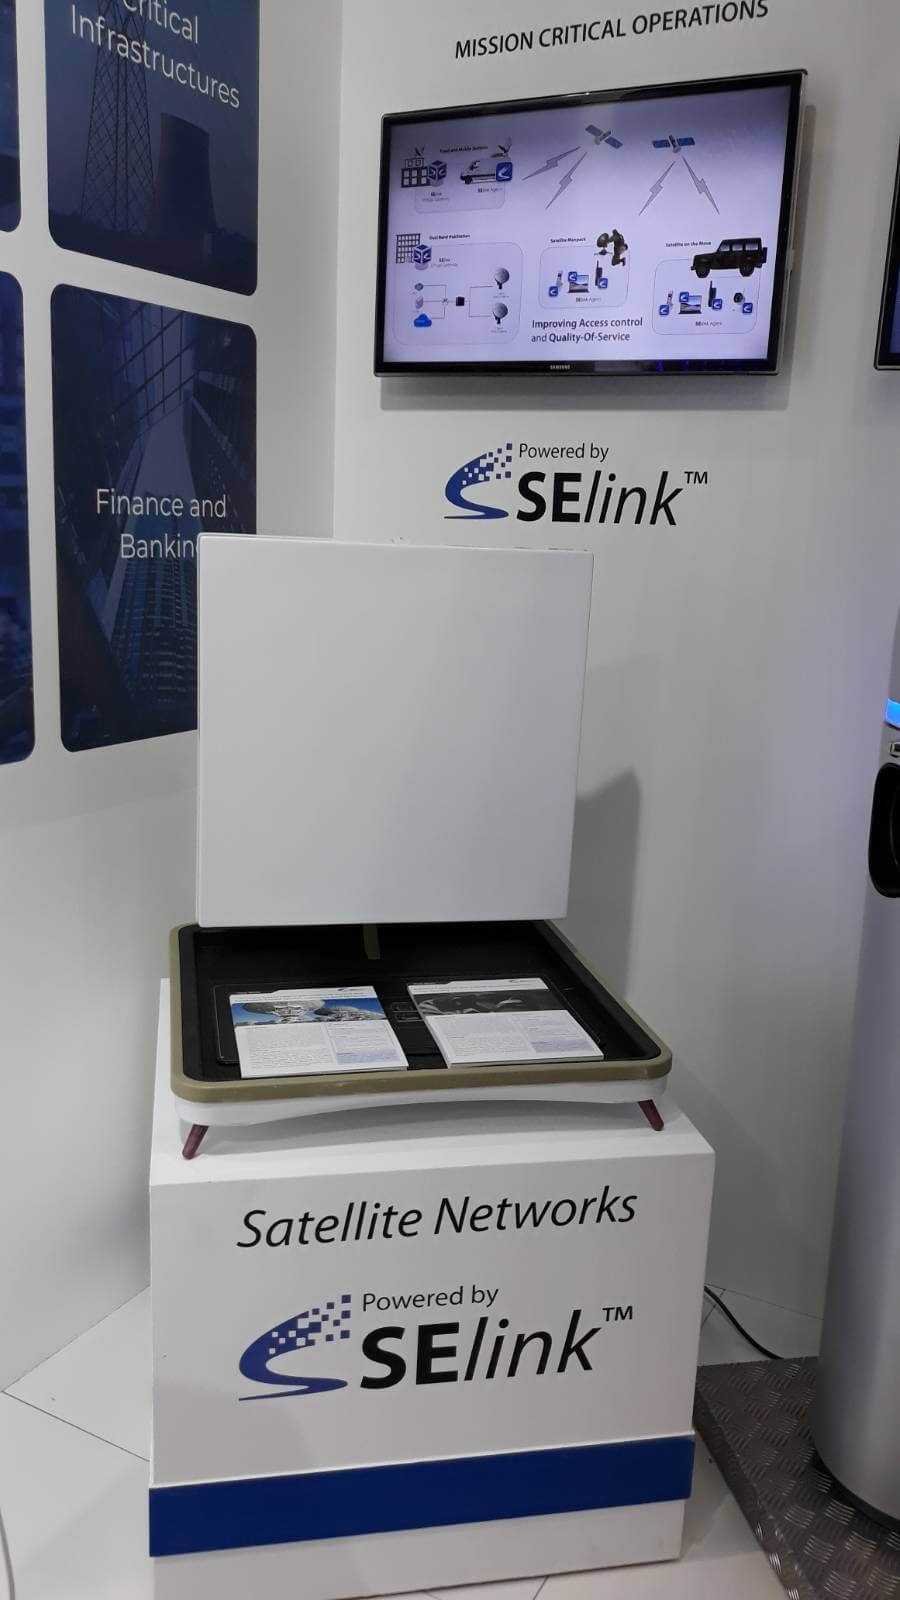 SElink for secure satellite communications